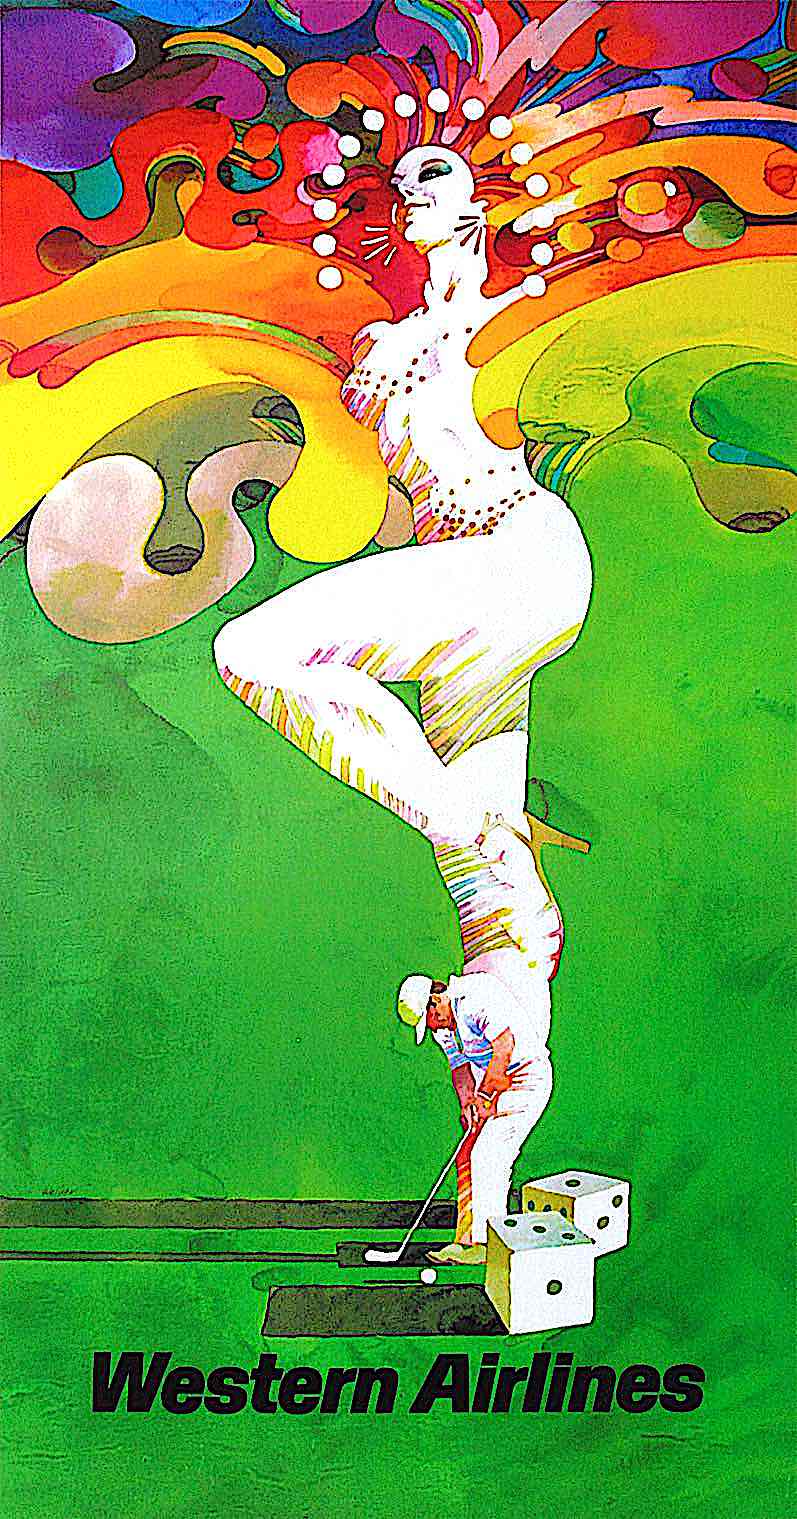 a Don Weller psychedelic showgirl illustration for Western Airlines